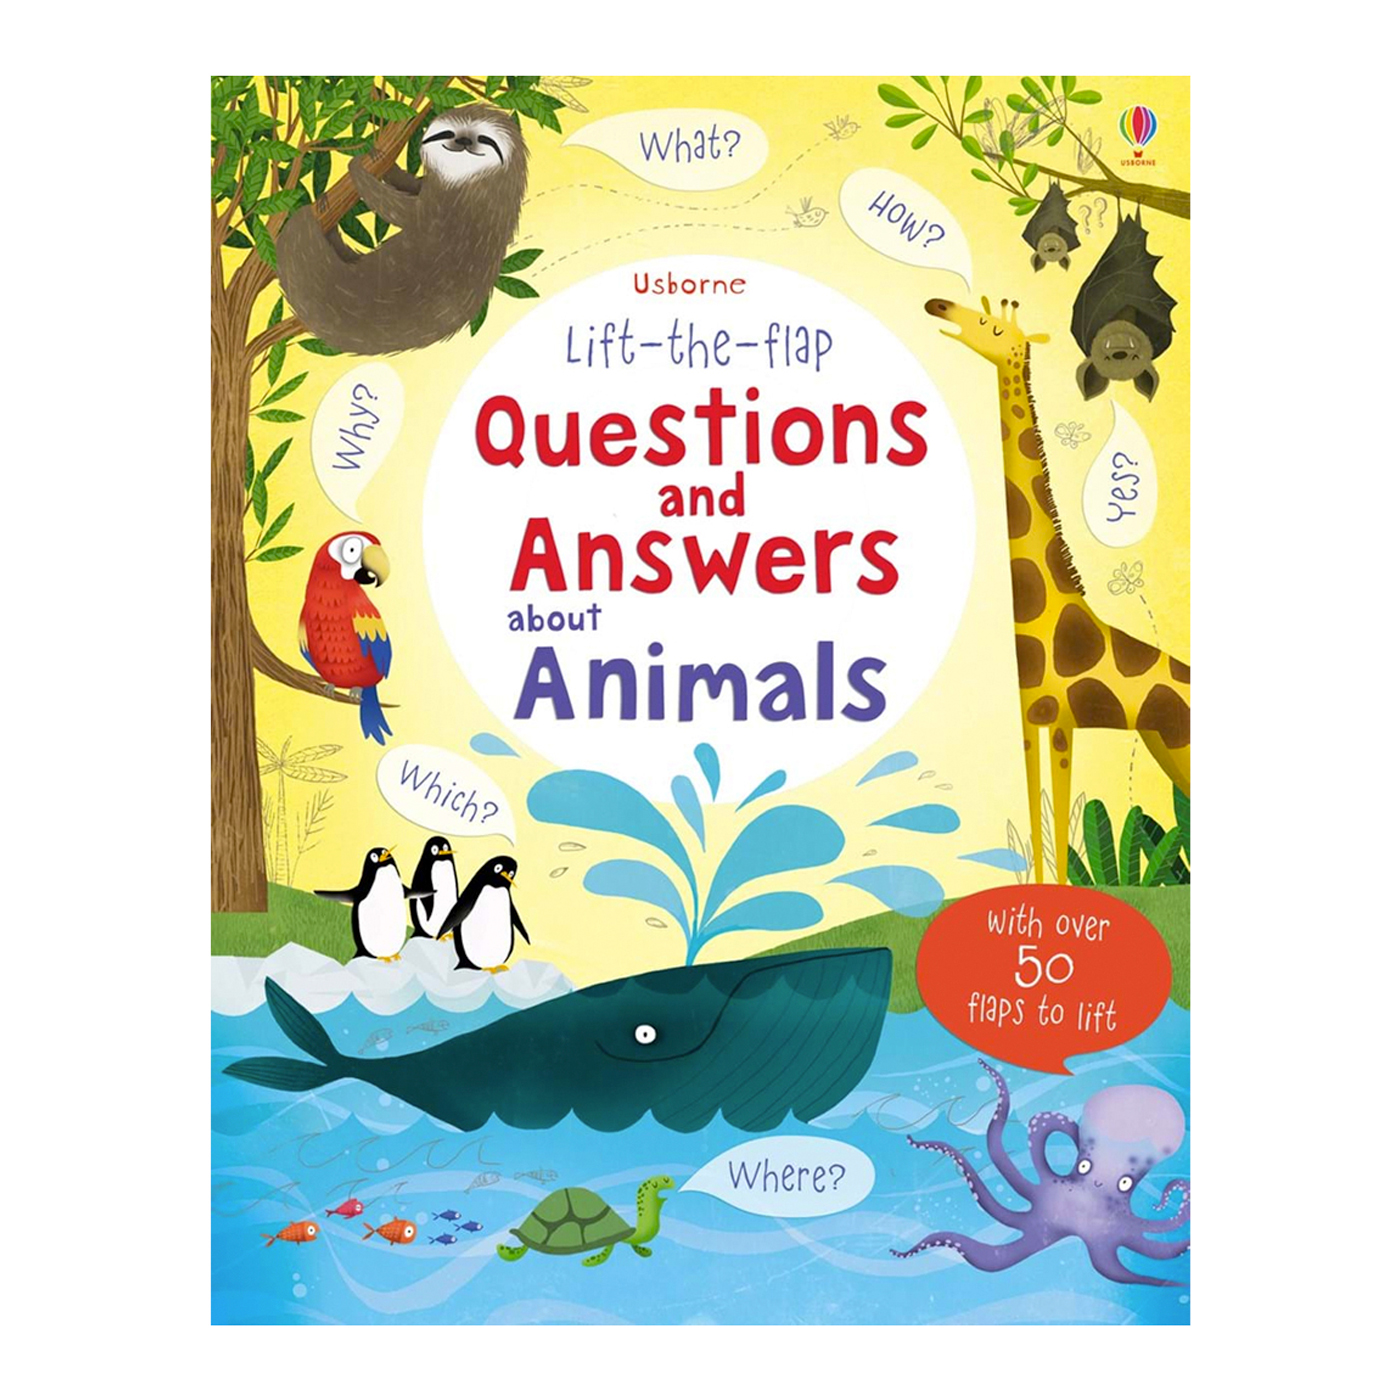  Questions and Answers: Animals